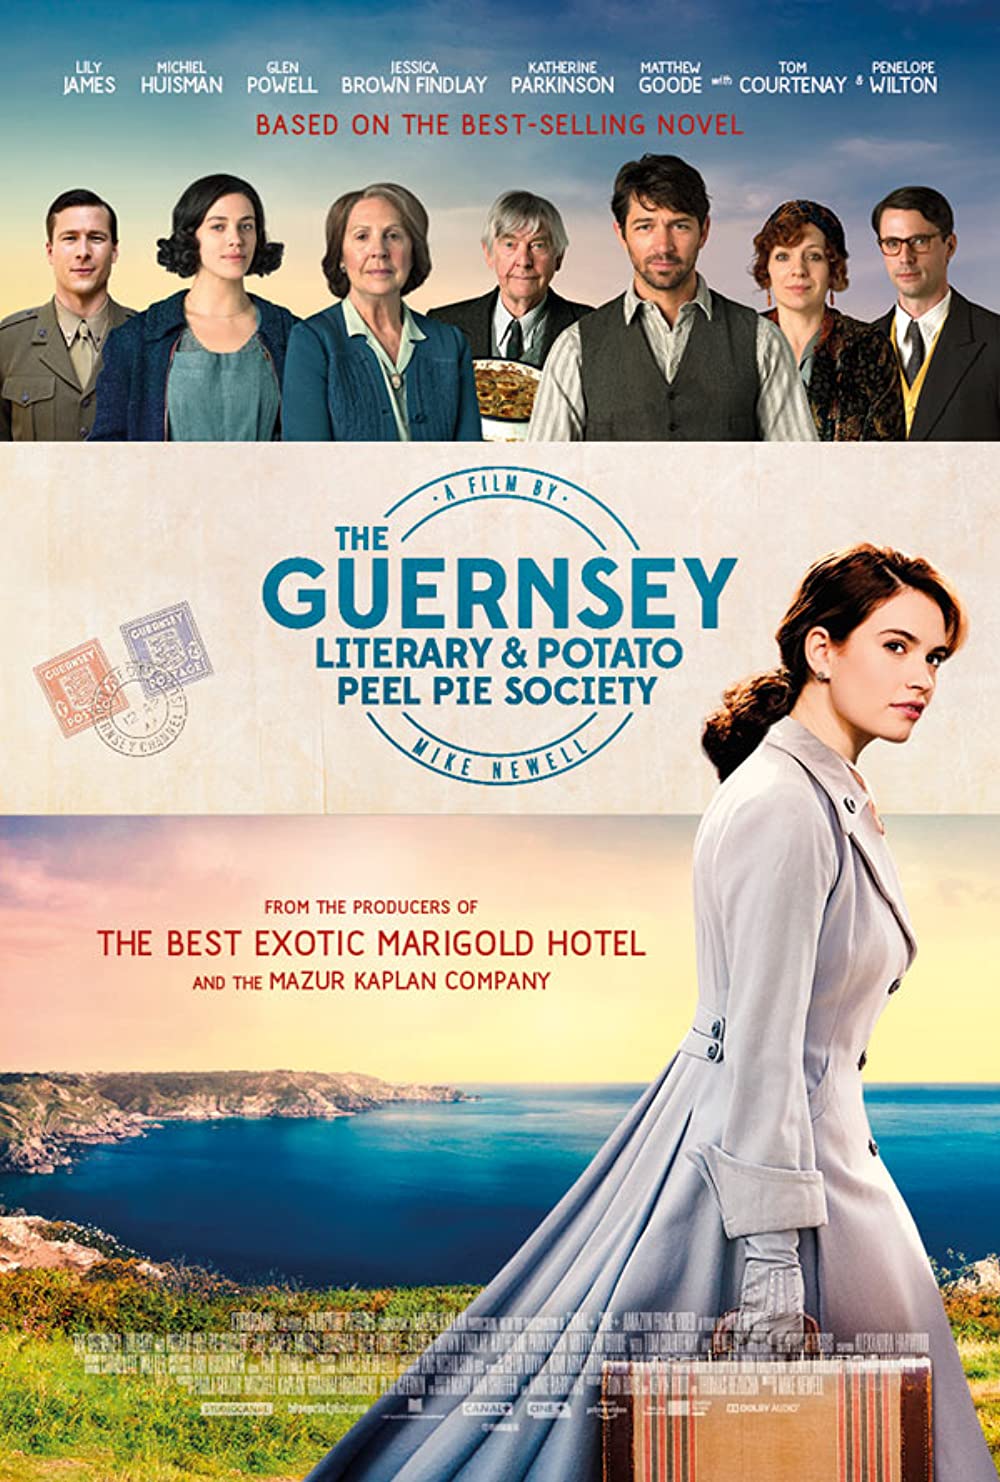 Poster phim "The Guernsey Literary and Potato Peel Pie Society"